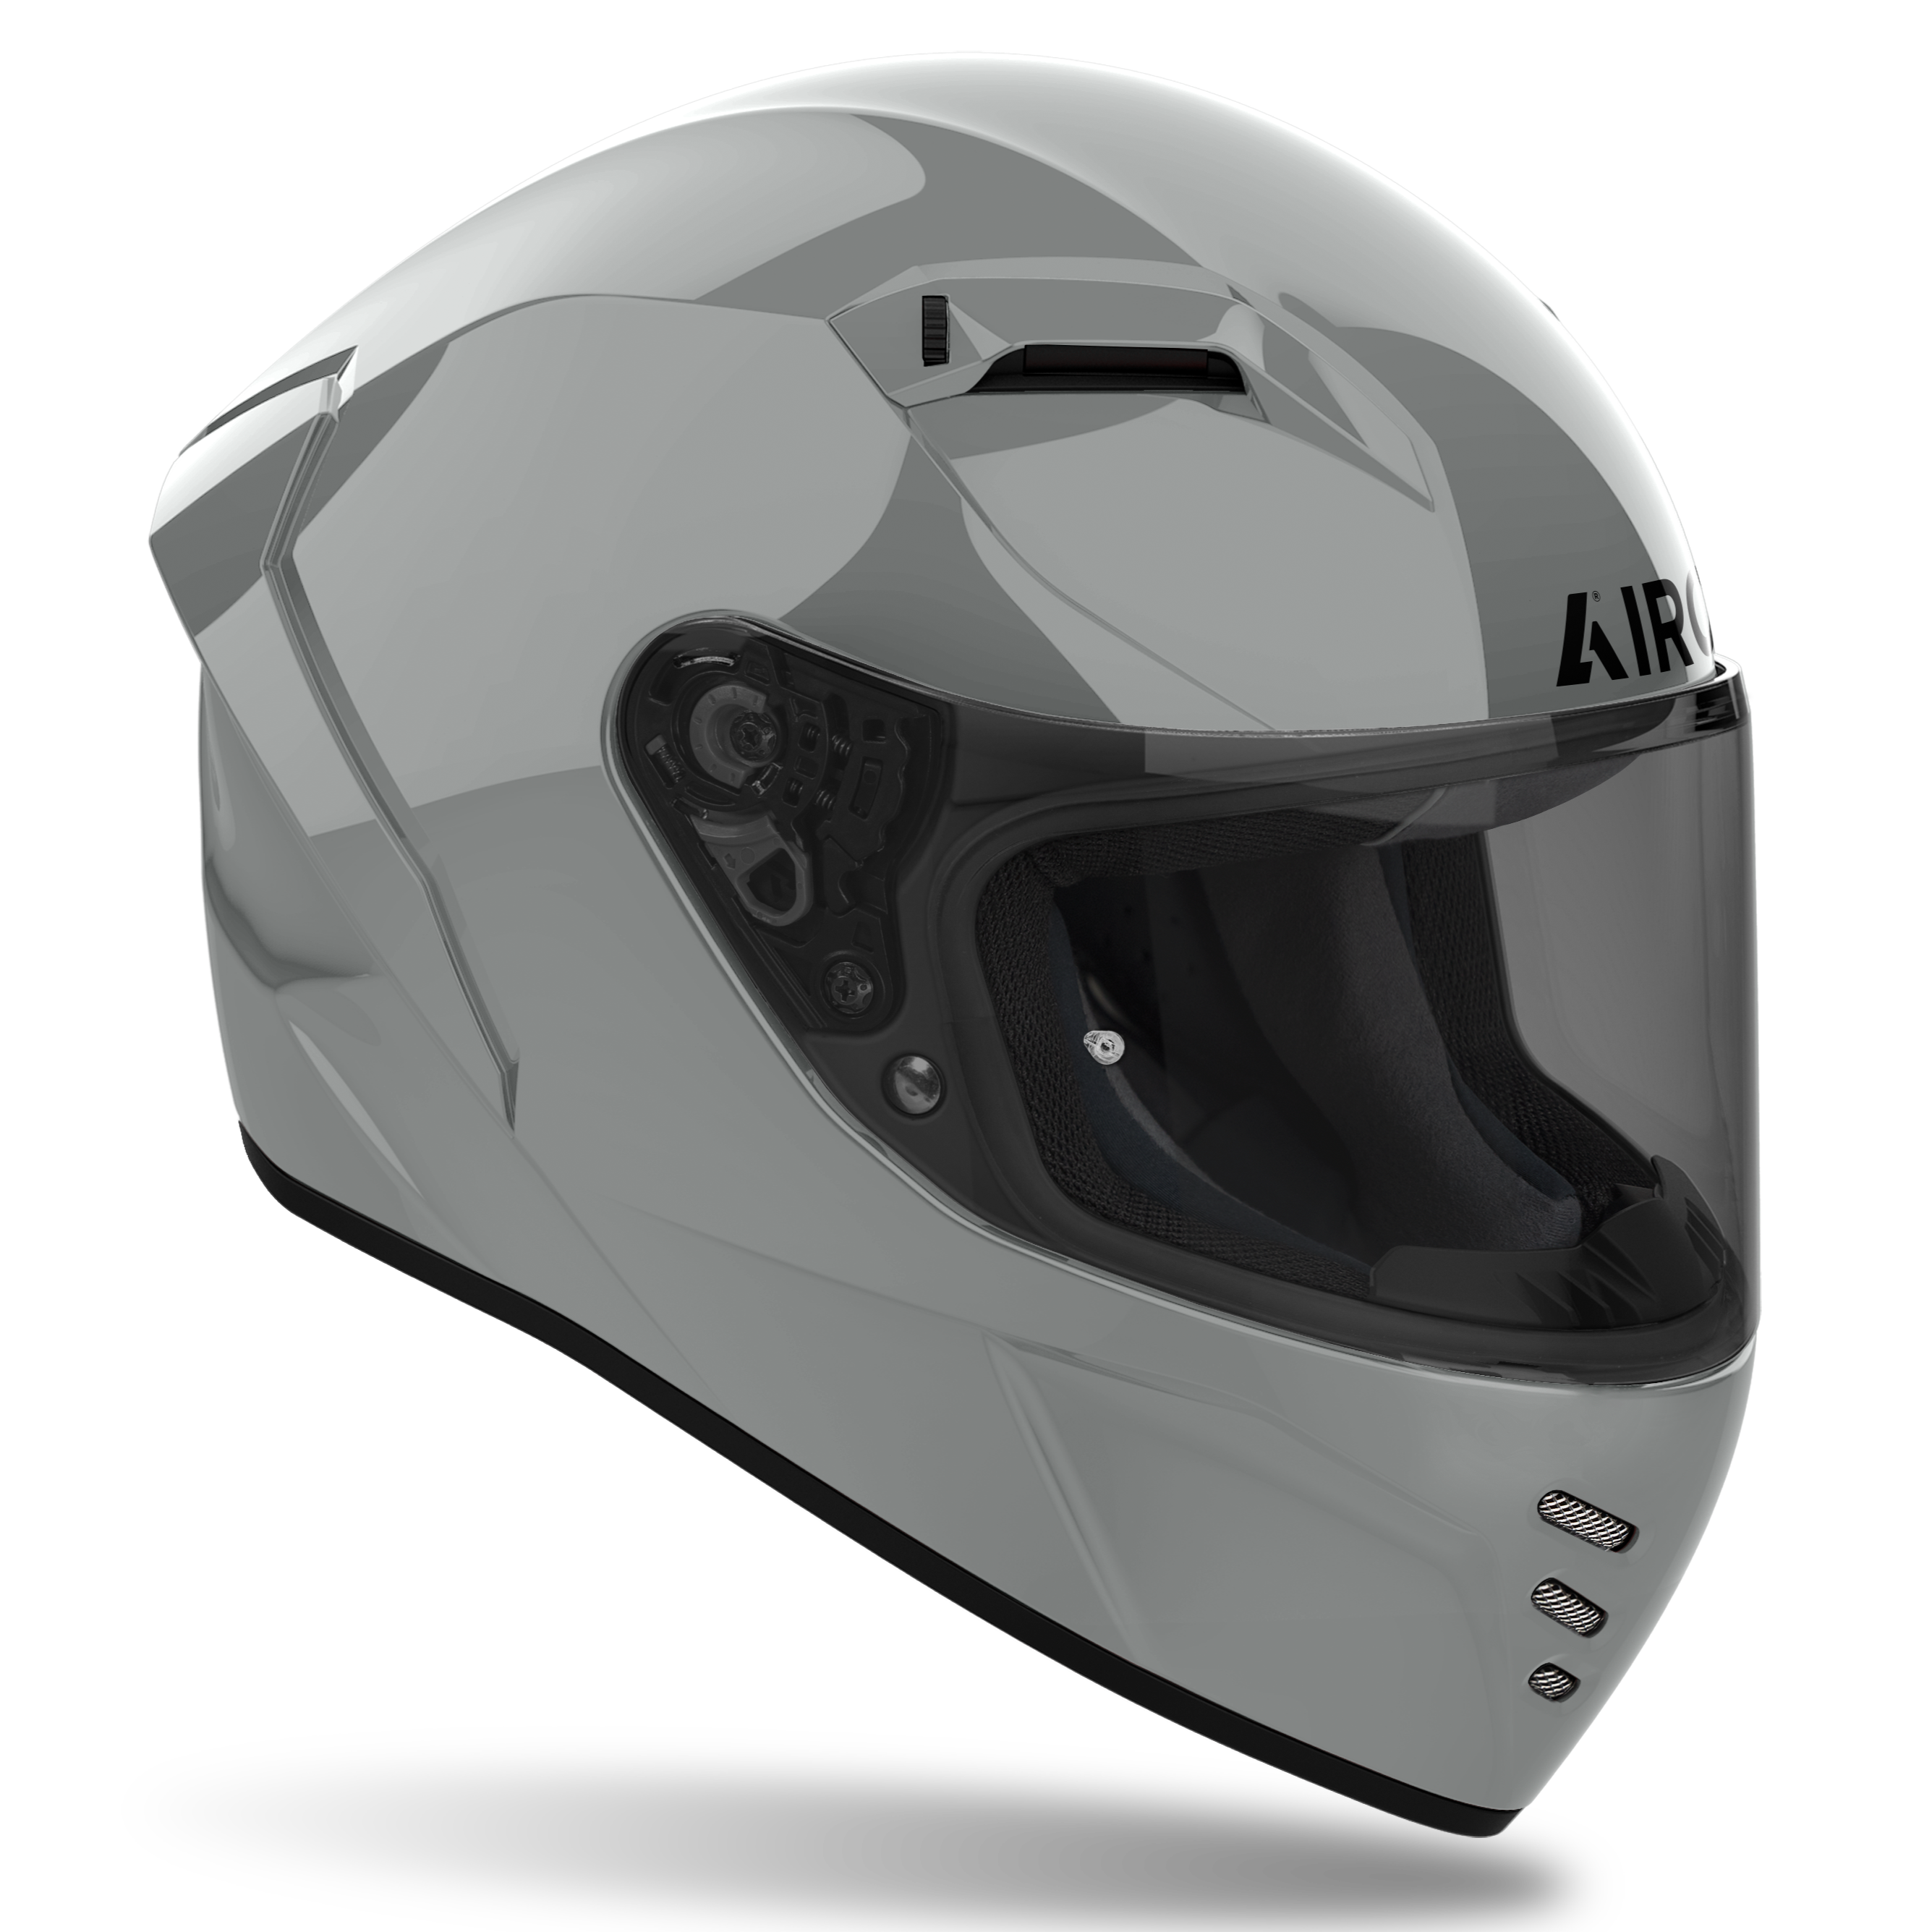 AIROH CONNOR Color Cement Grey Gloss Helmet